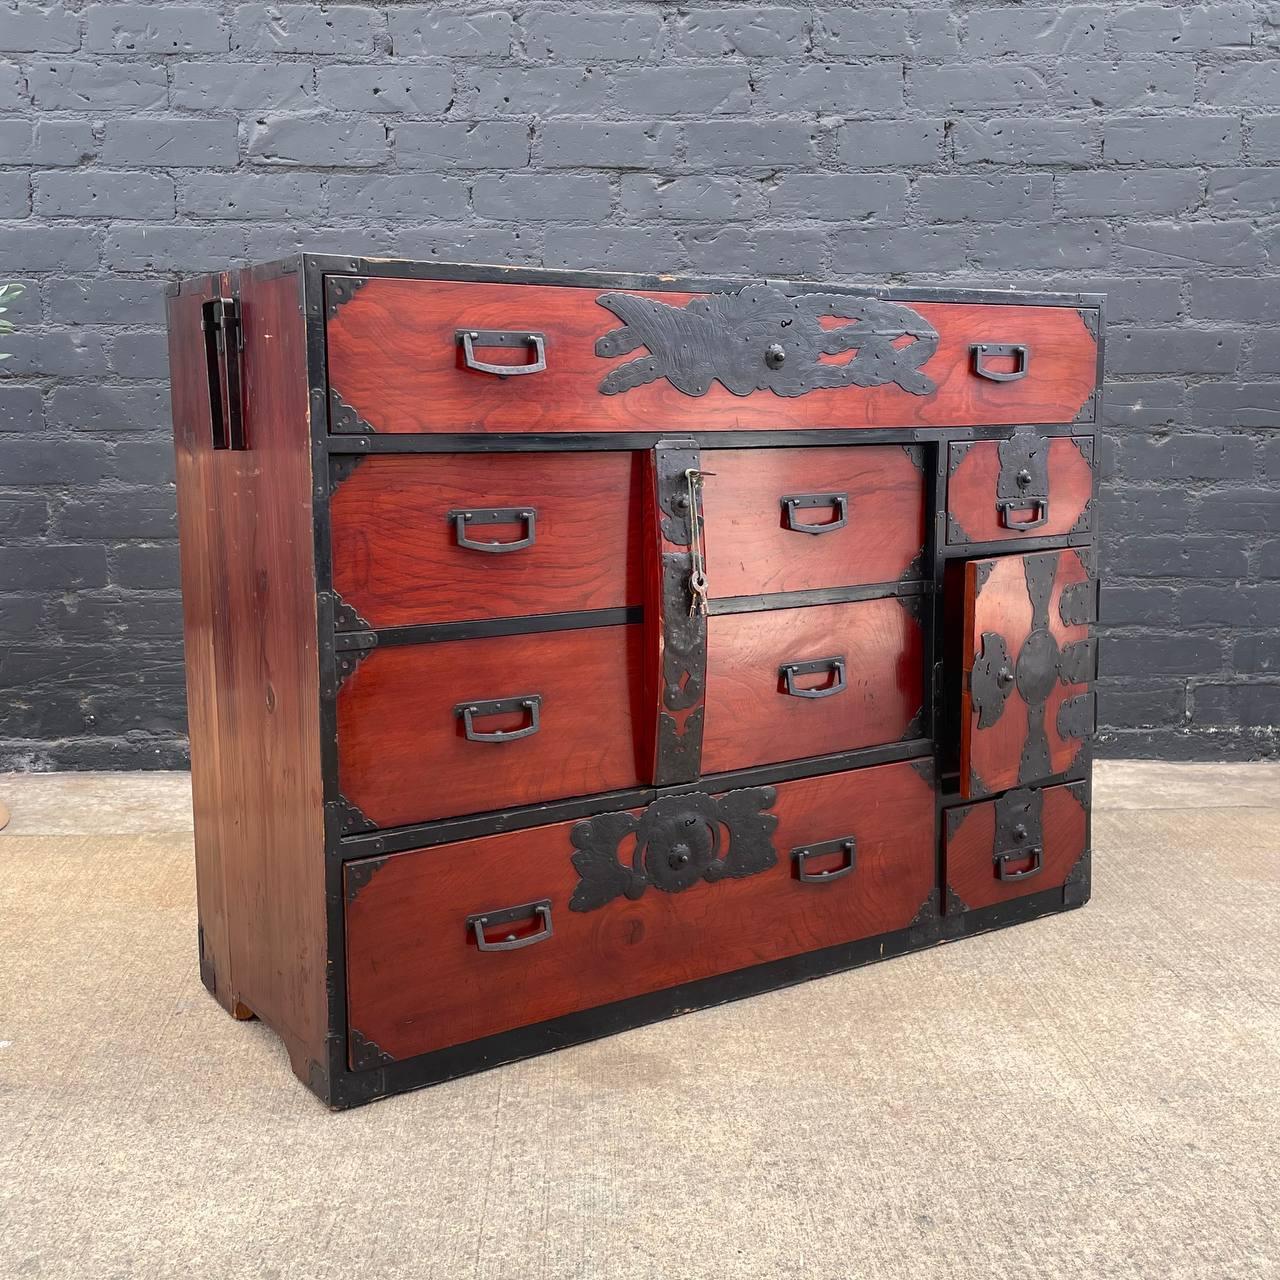 Antique Late 1800s Japanese Cedar Tansu Chest of Drawers Dresser 

Country: Japan
Materials: Wood, Iron
Condition: Original Condition
Style: Italian Baroque
Year: 1890s

$2,250

Dimensions:
34.50”H x 46”W x 17”D.